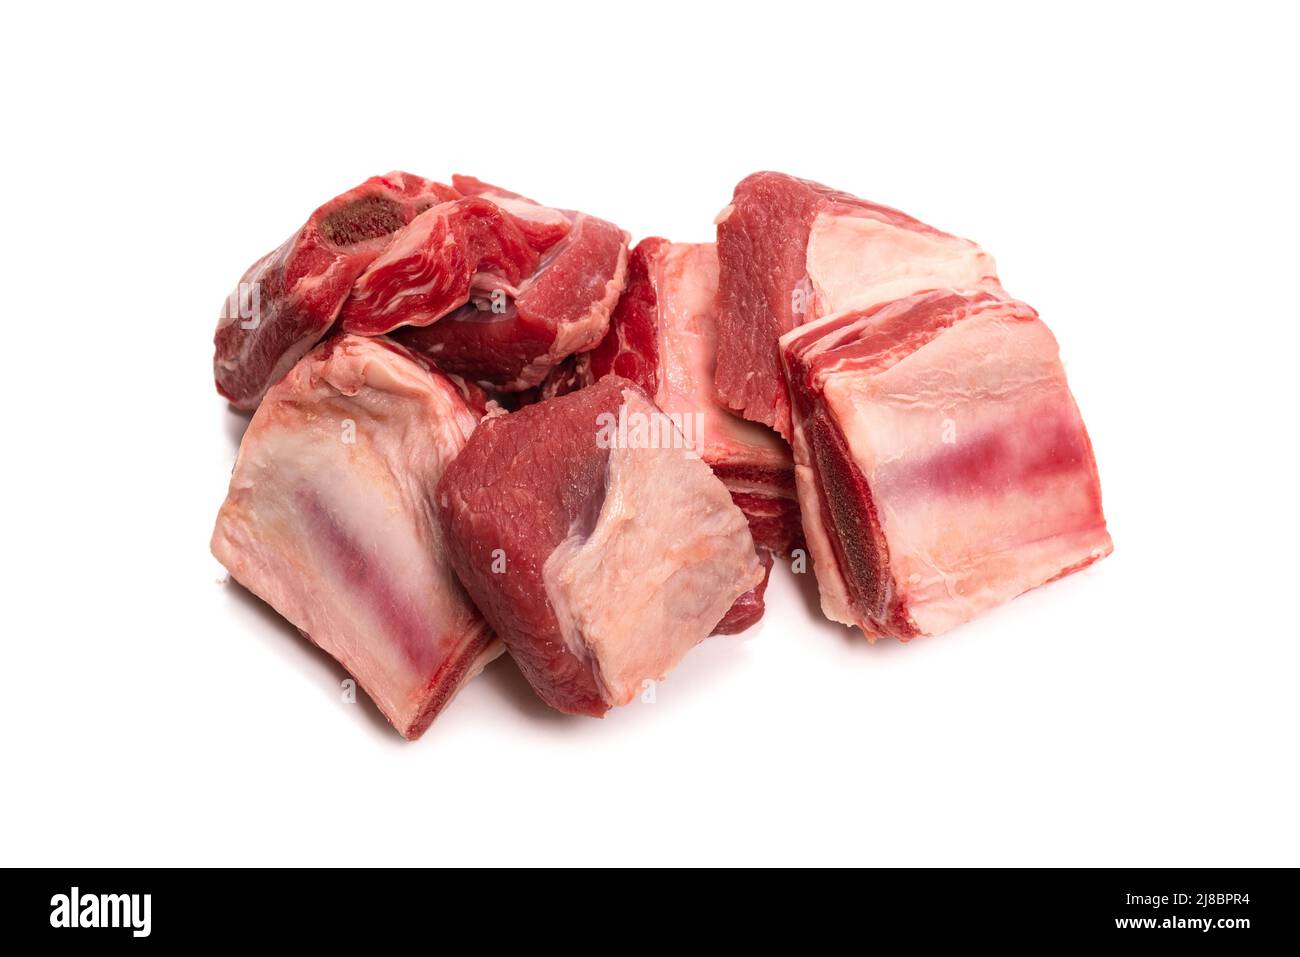 Raw beef ribs isolated on white background. Top view. Stock Photo